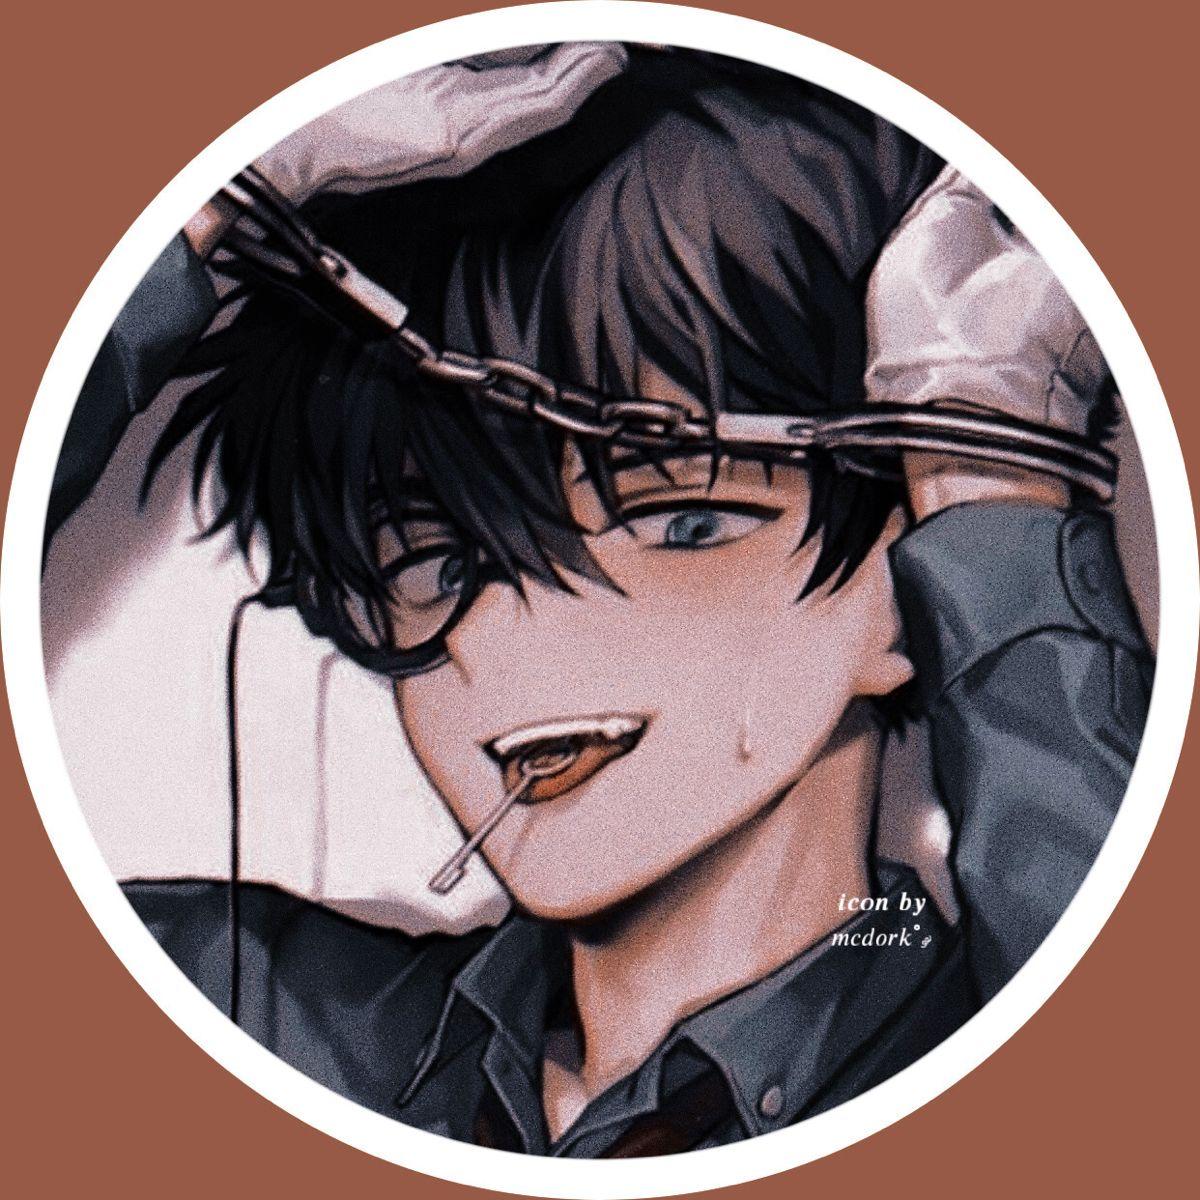 Aesthetic Anime Boy Pfp  Top 20 Aesthetic Anime Boy Profile Pictures Pfp  Avatar Dp icon  HQ 